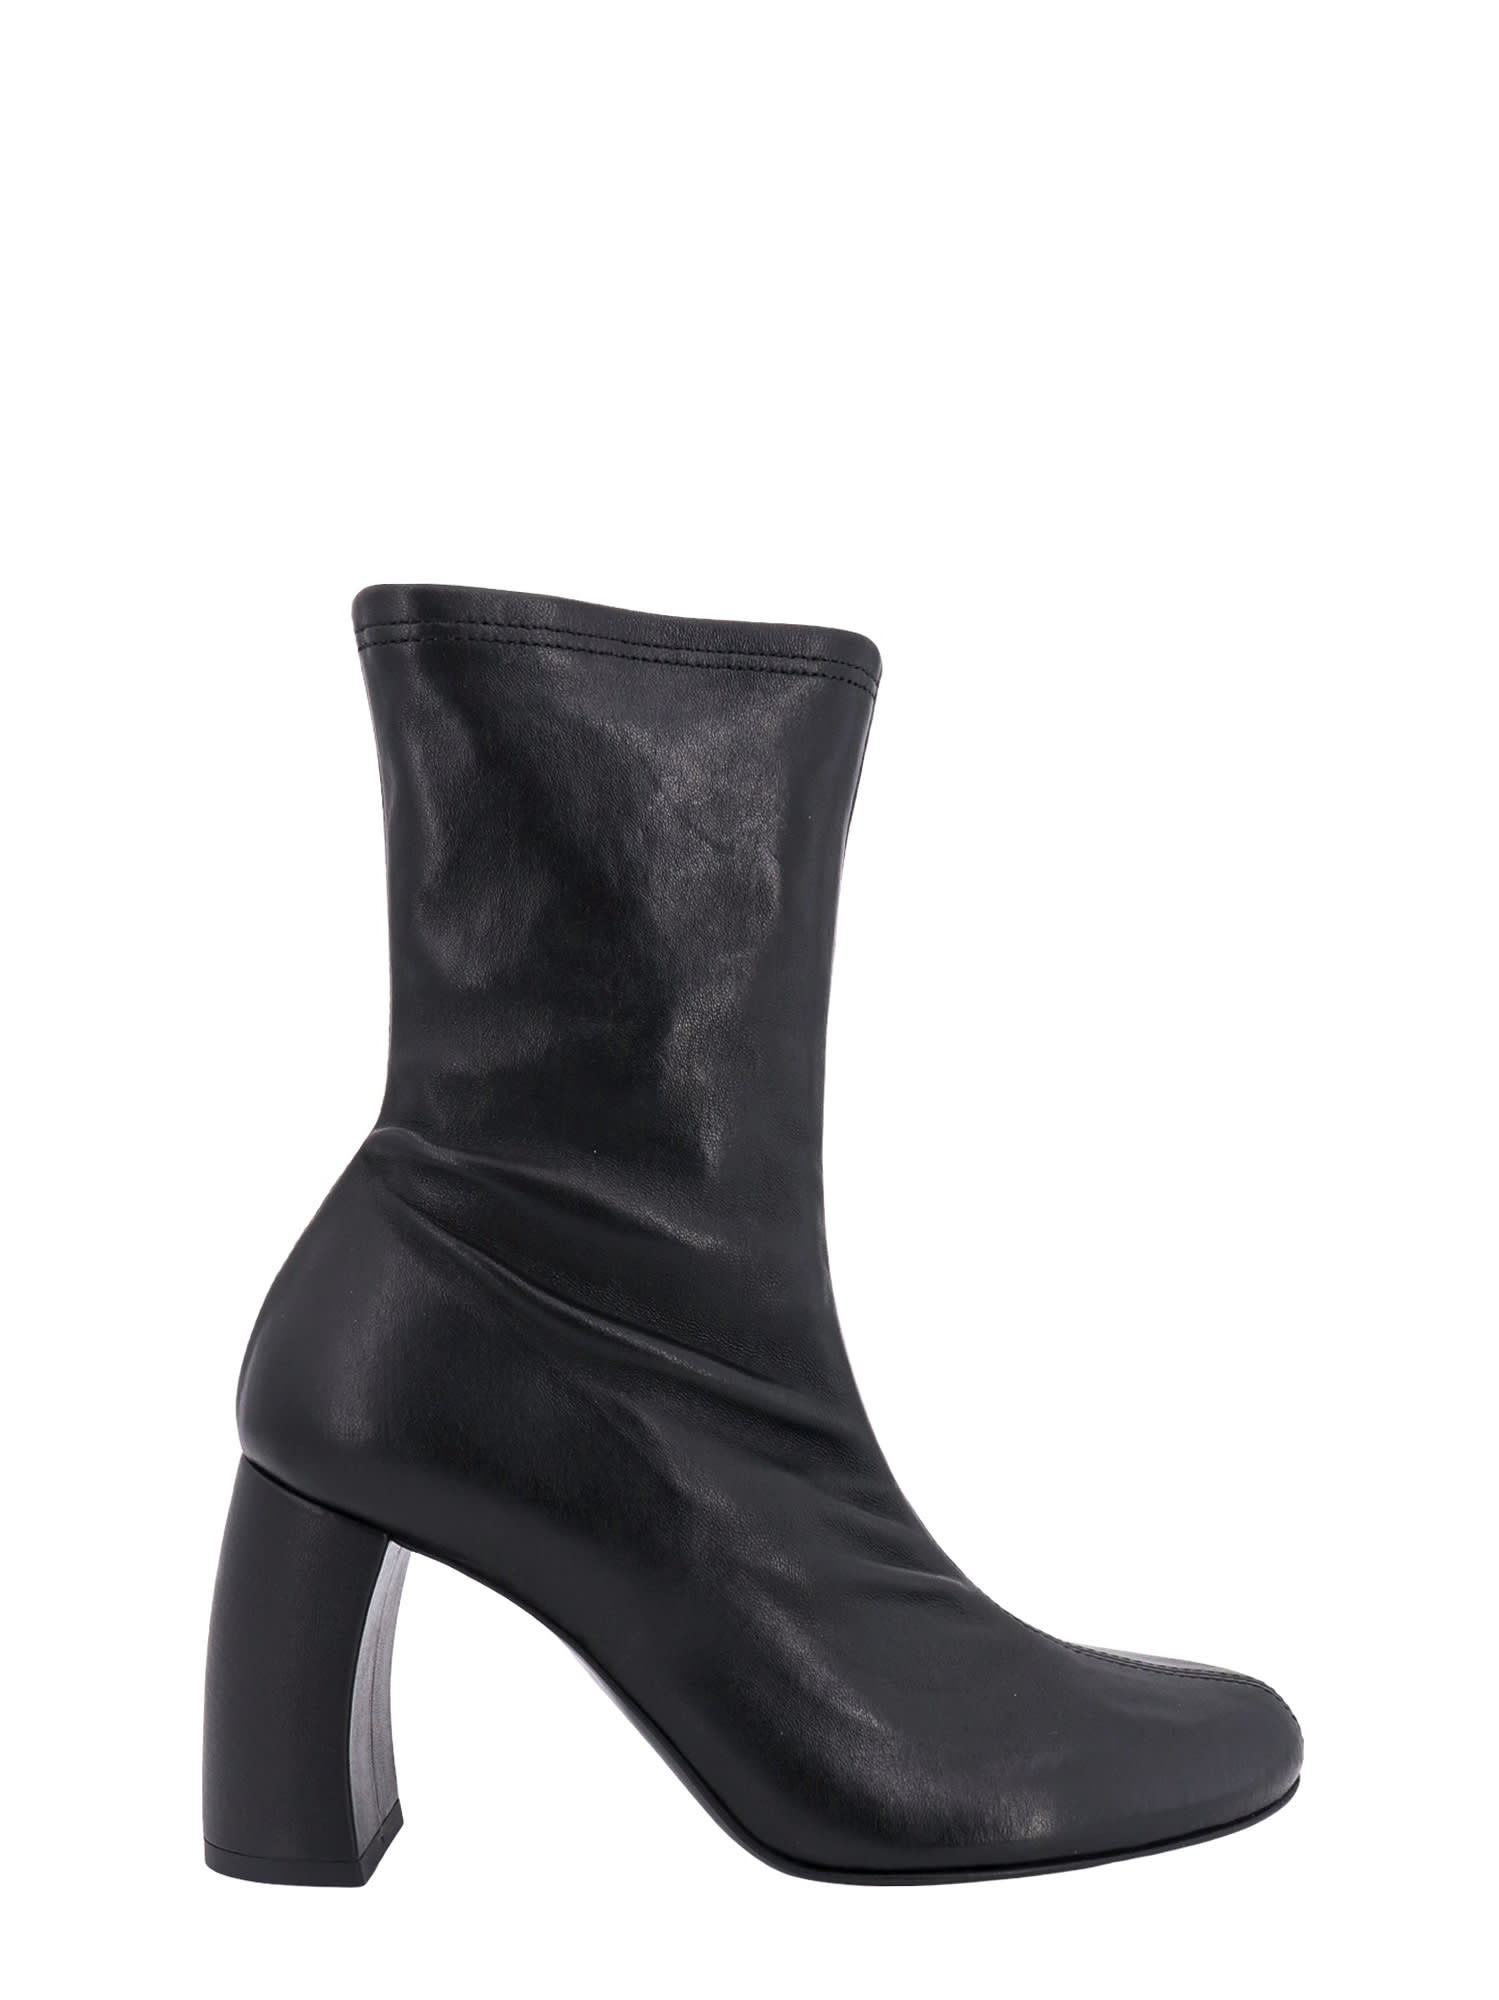 ANN DEMEULEMEESTER ANKLE BOOTS